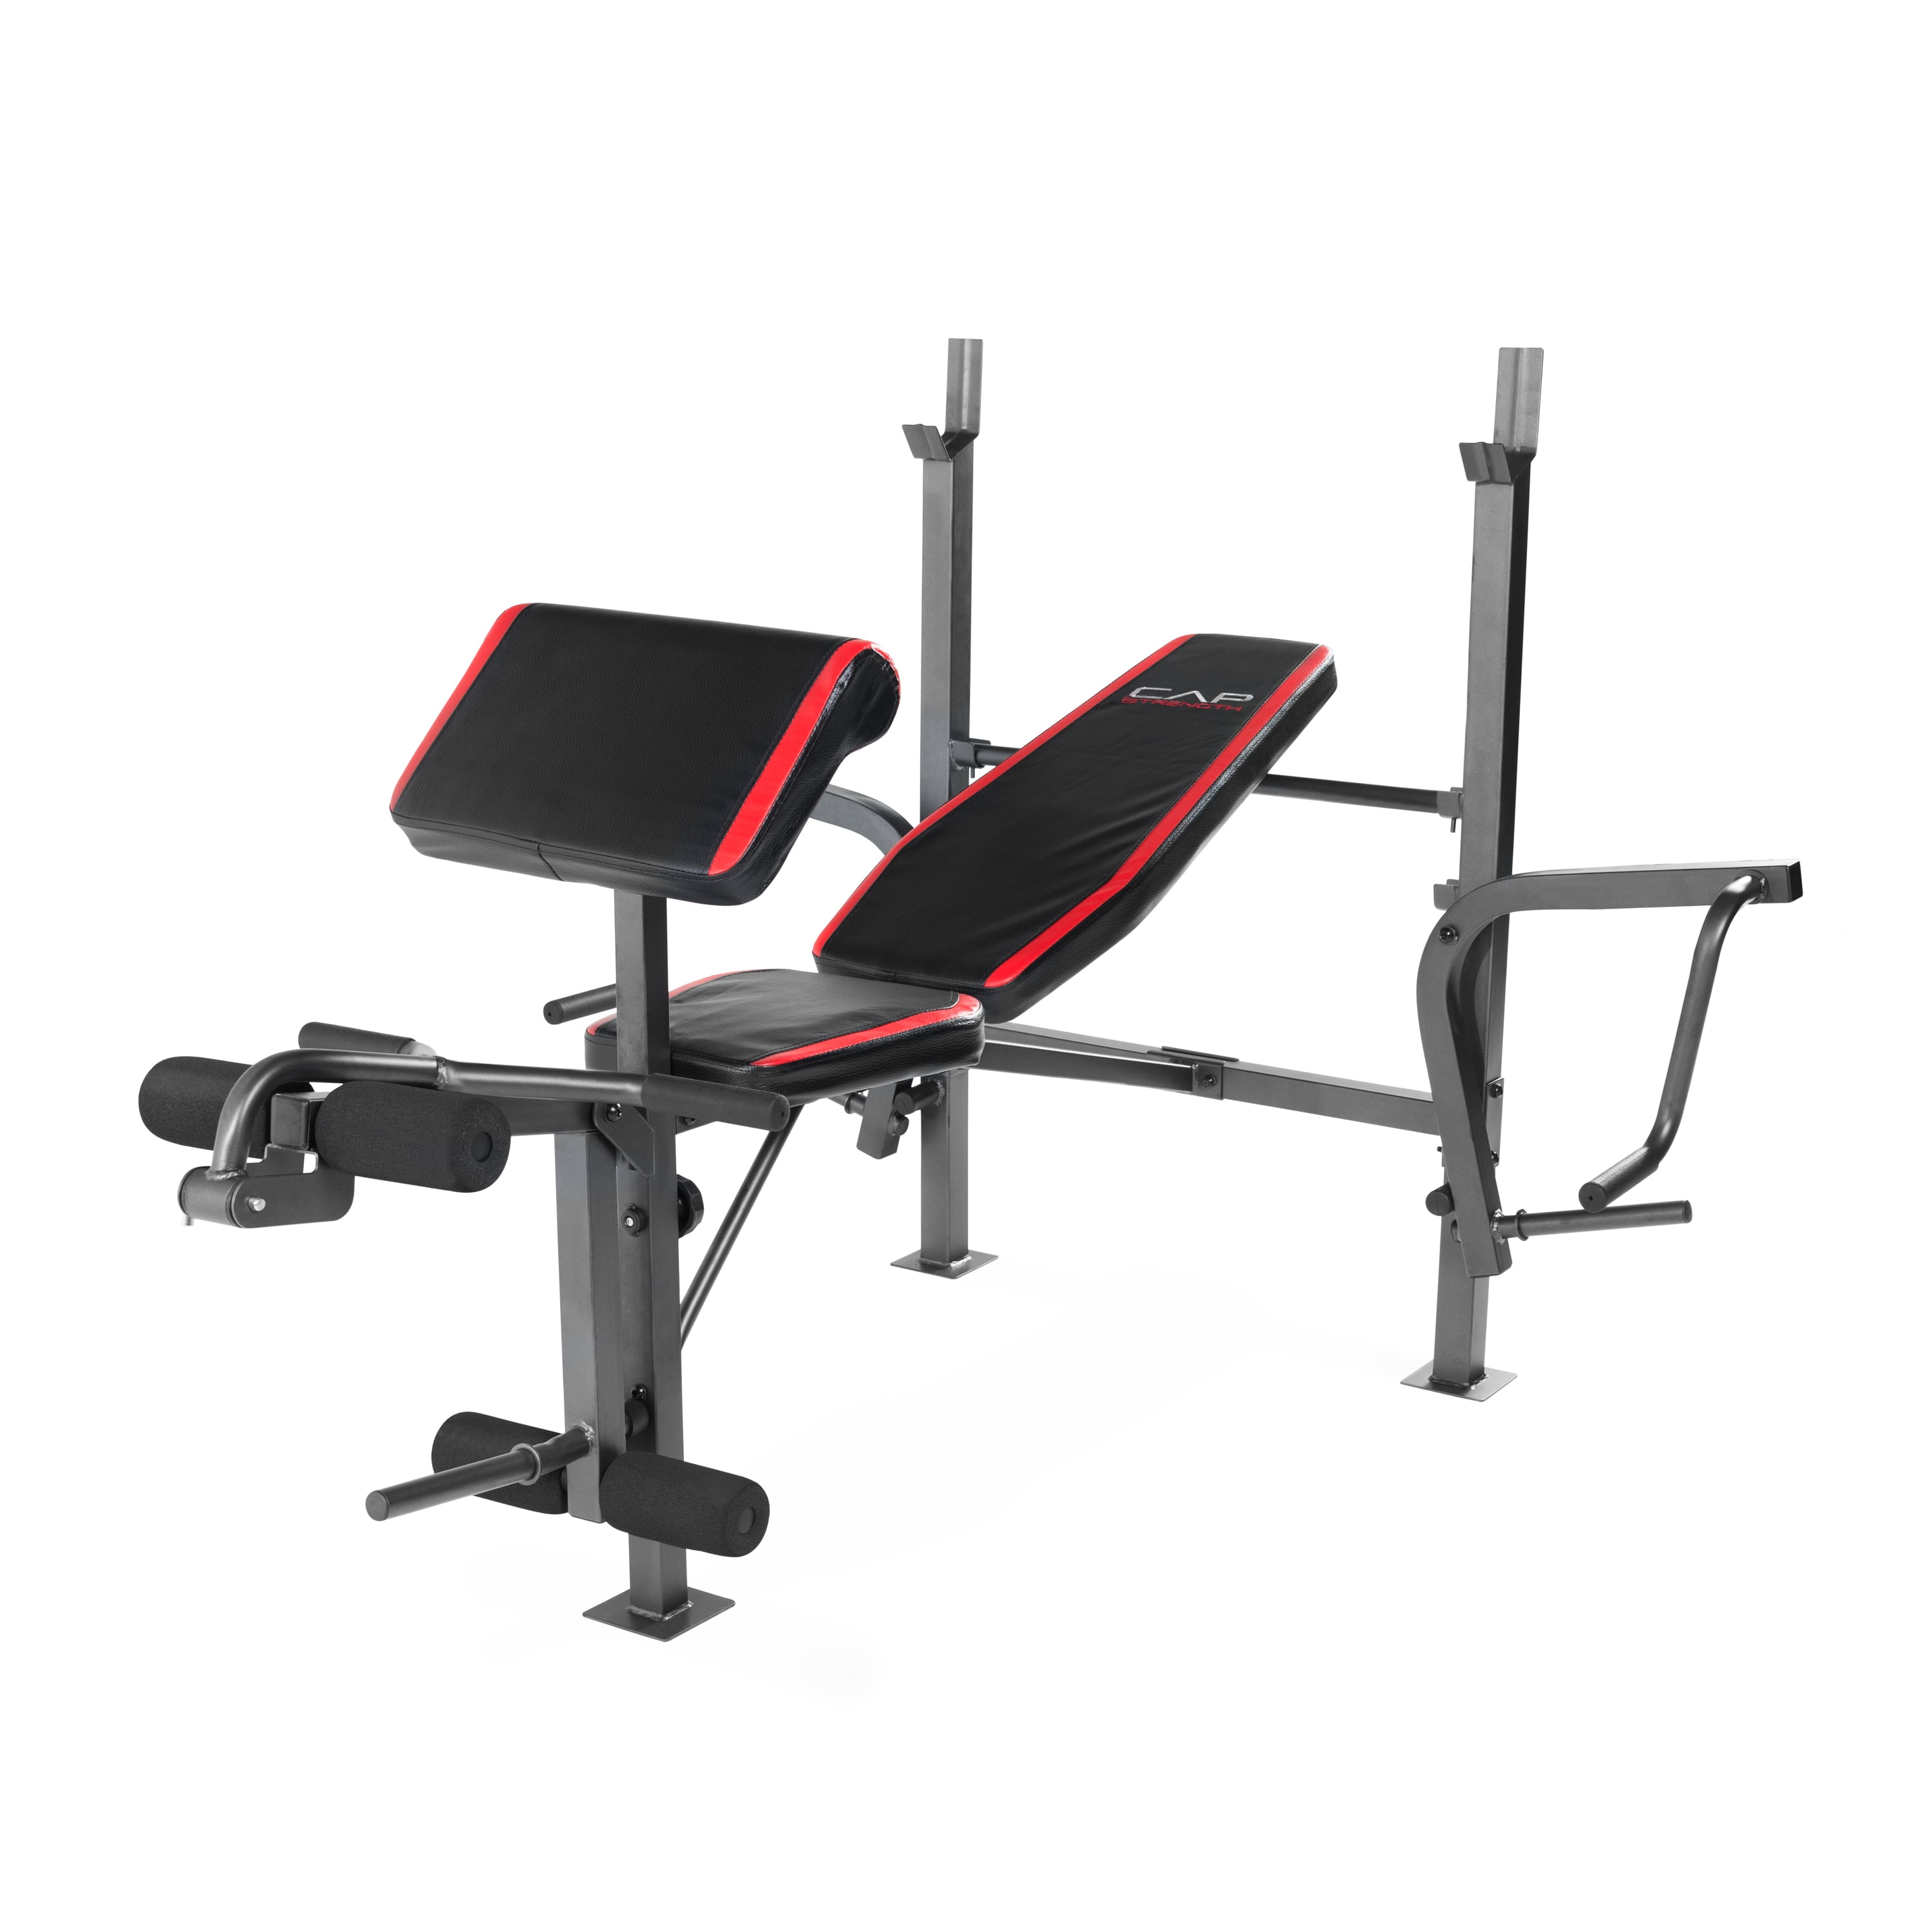 CAP Strength Standard Bench with Butterfly and Preacher Curl